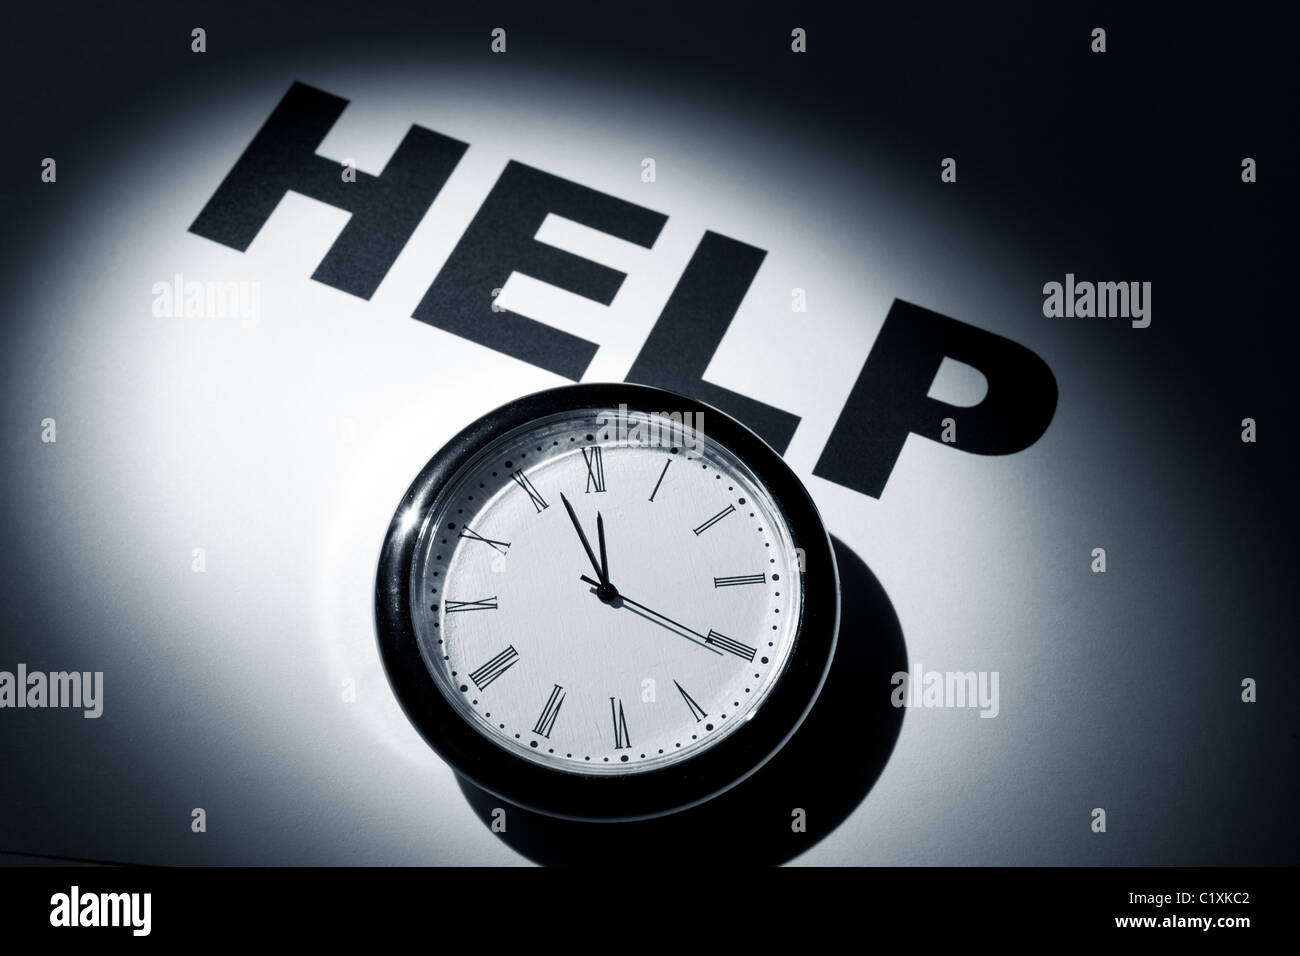 Clock and word, concept of Need Help Stock Photo